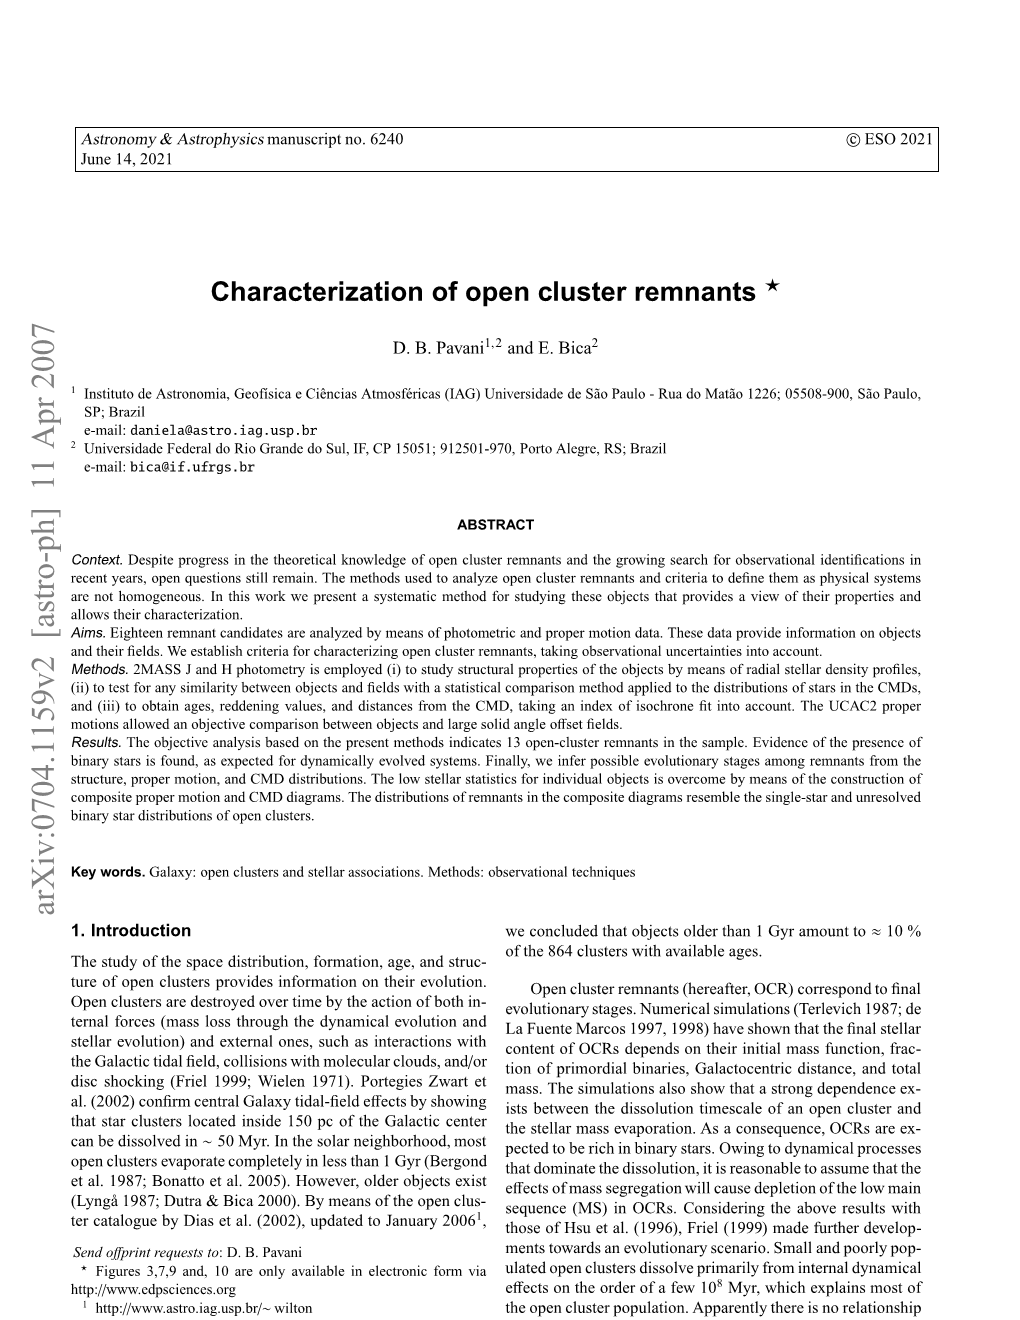 Characterization of Open Cluster Remnants